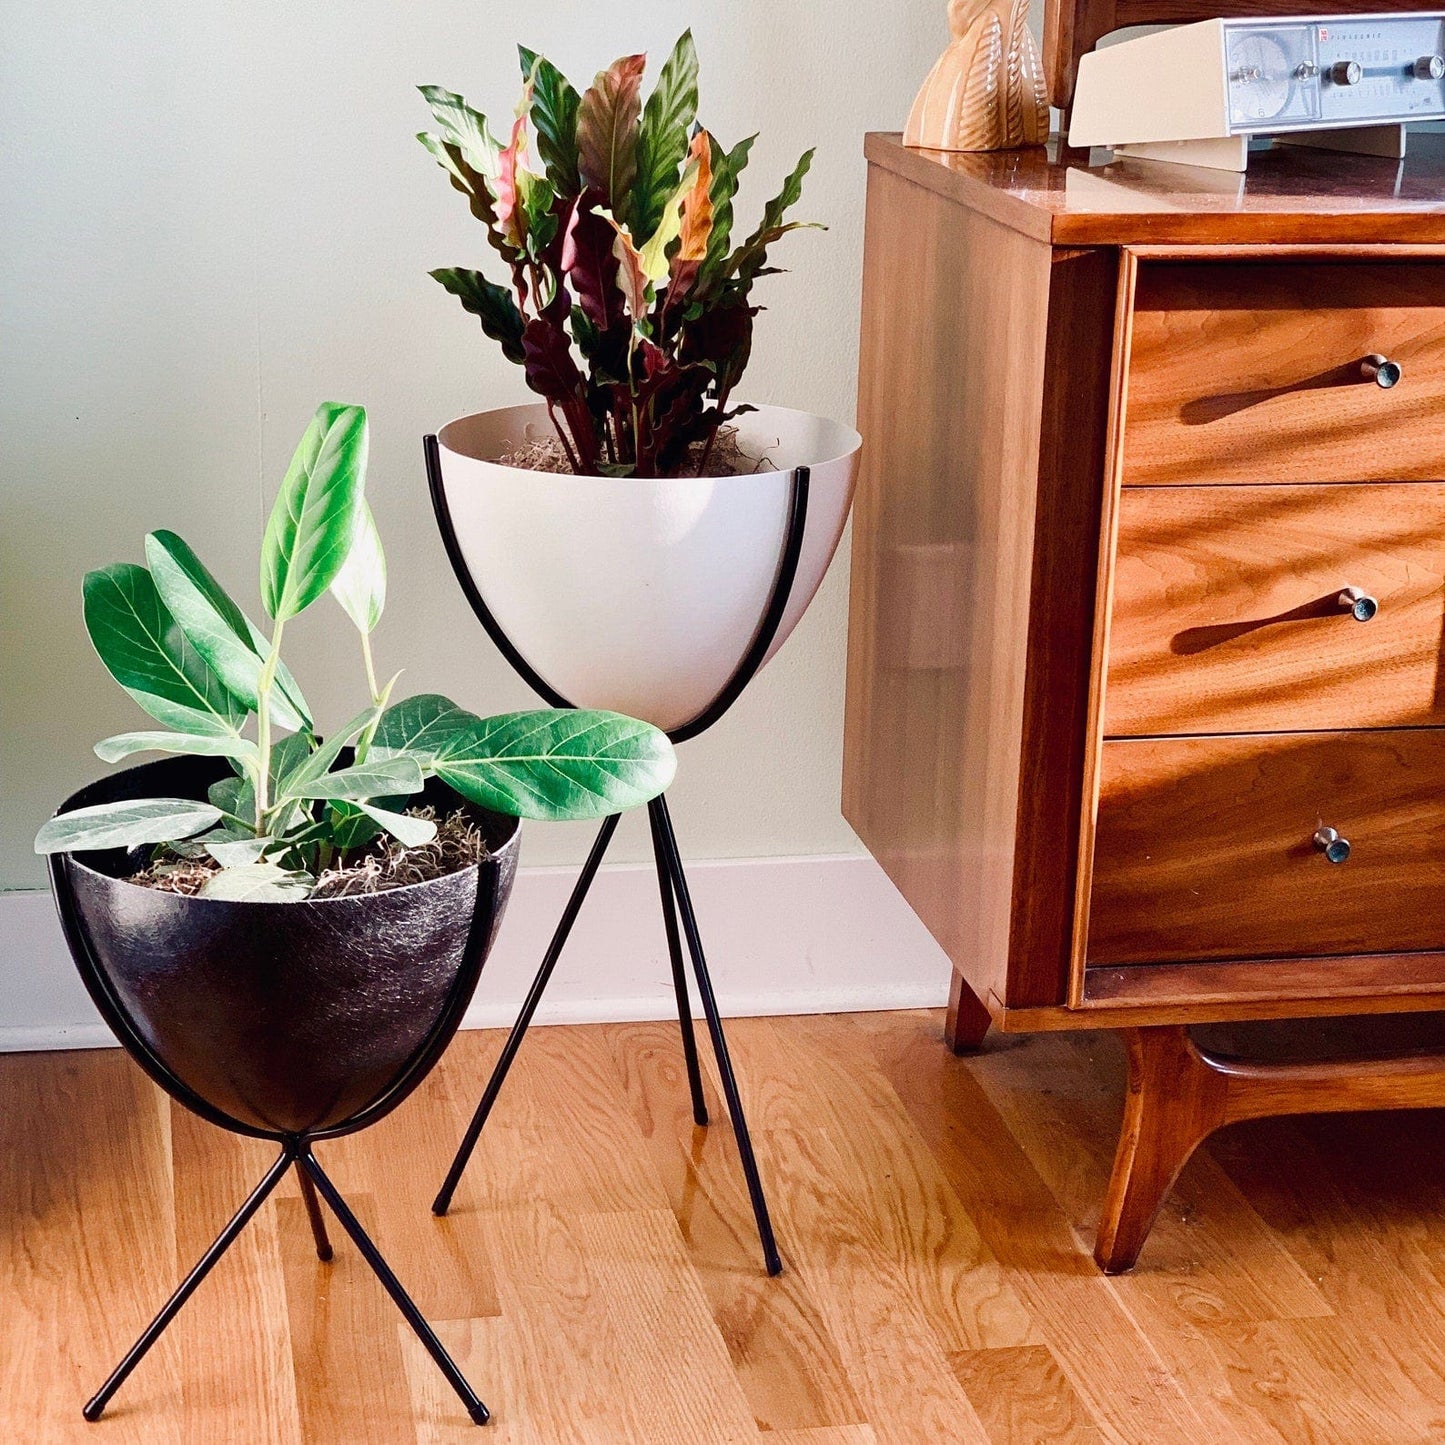 Small bullet planter with black pot and large bullet planter with natural white pot. Both planters have black bases and come with floor protectors.